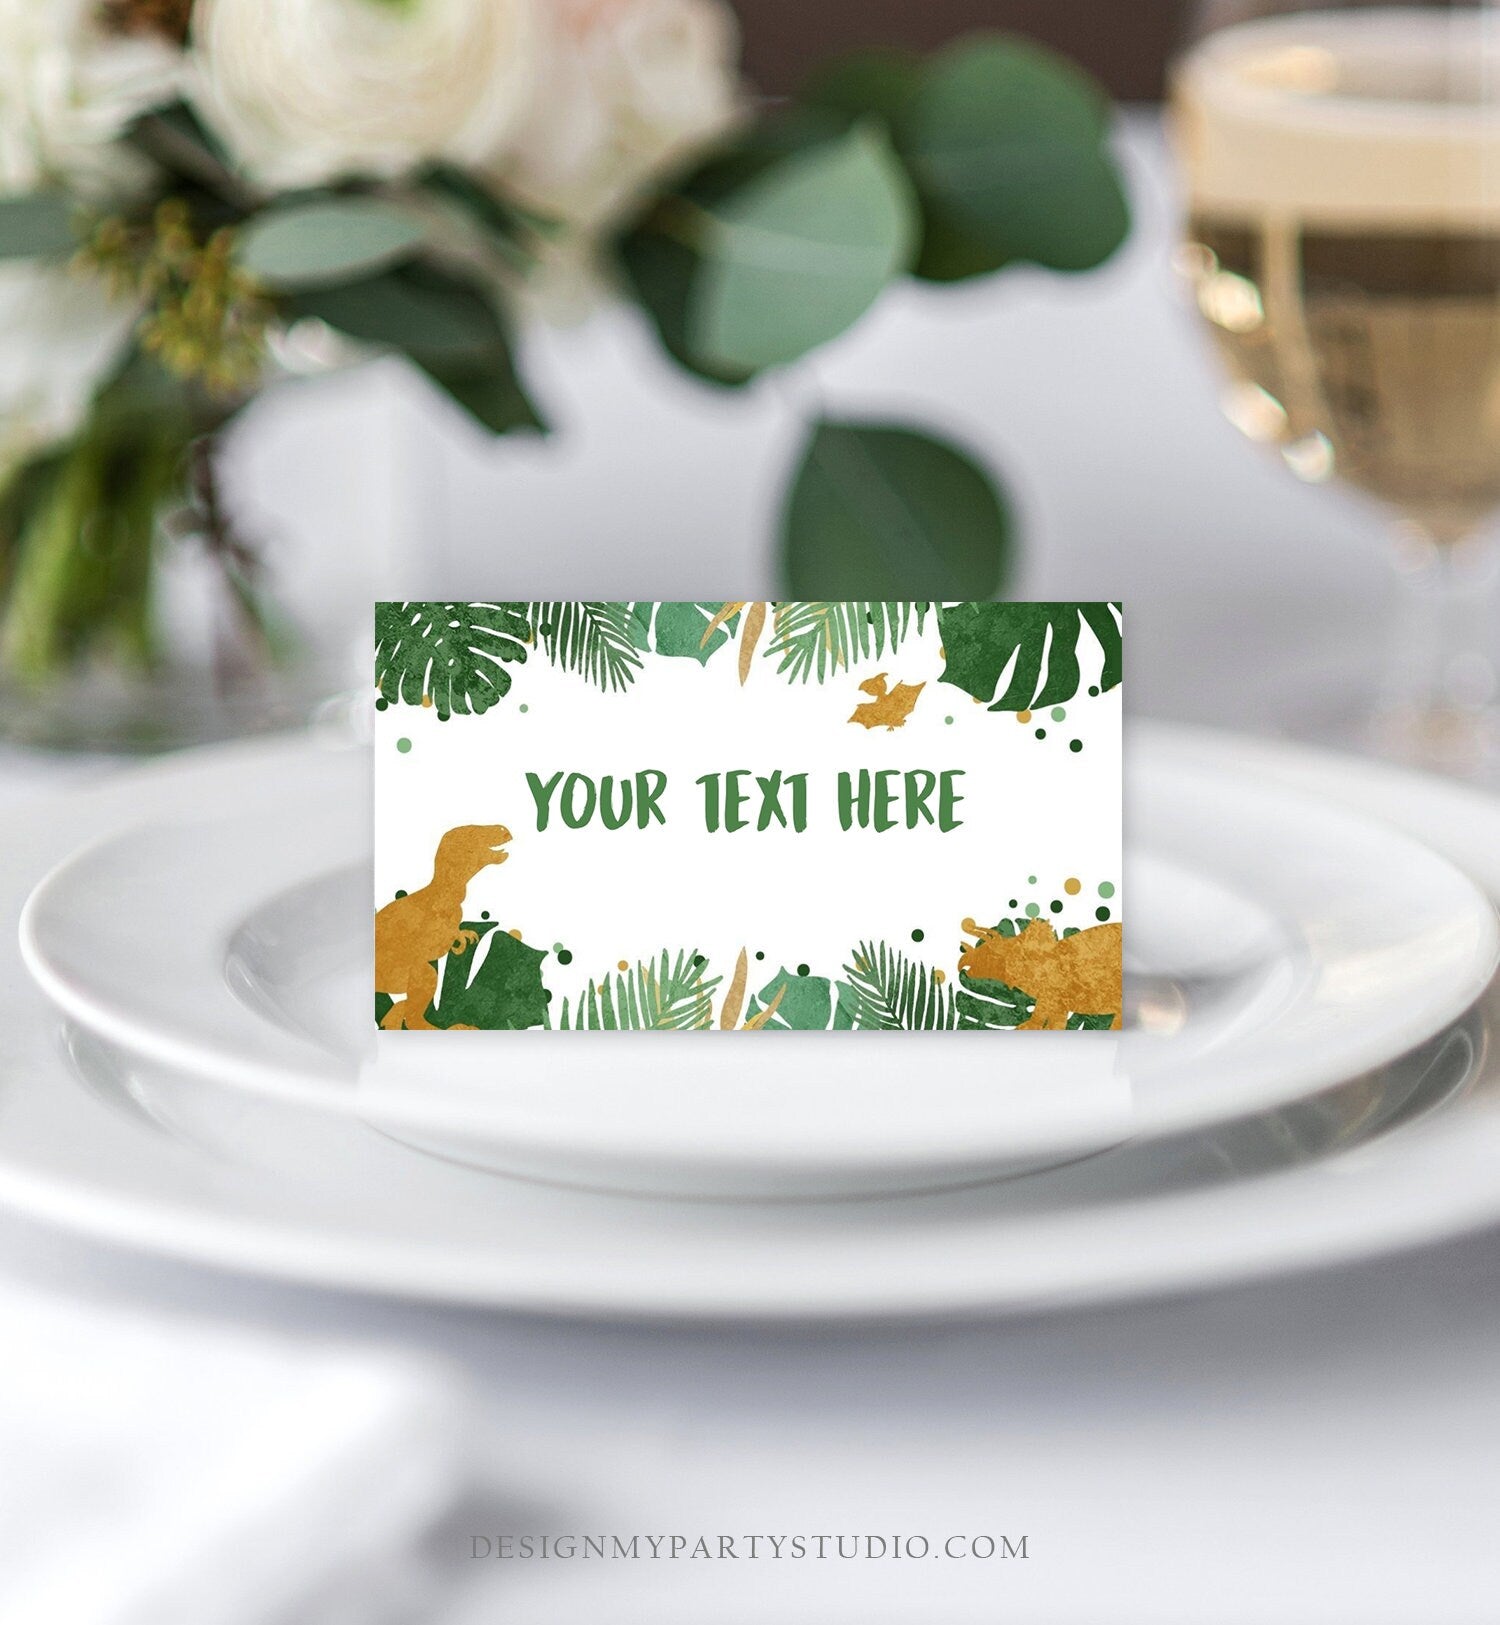 Editable Dinosaur Food Labels Dinosaur Party Place Card Tent Card Escort Card Green and Gold Dino Birthday Boy T-Rex Corjl Template 0146